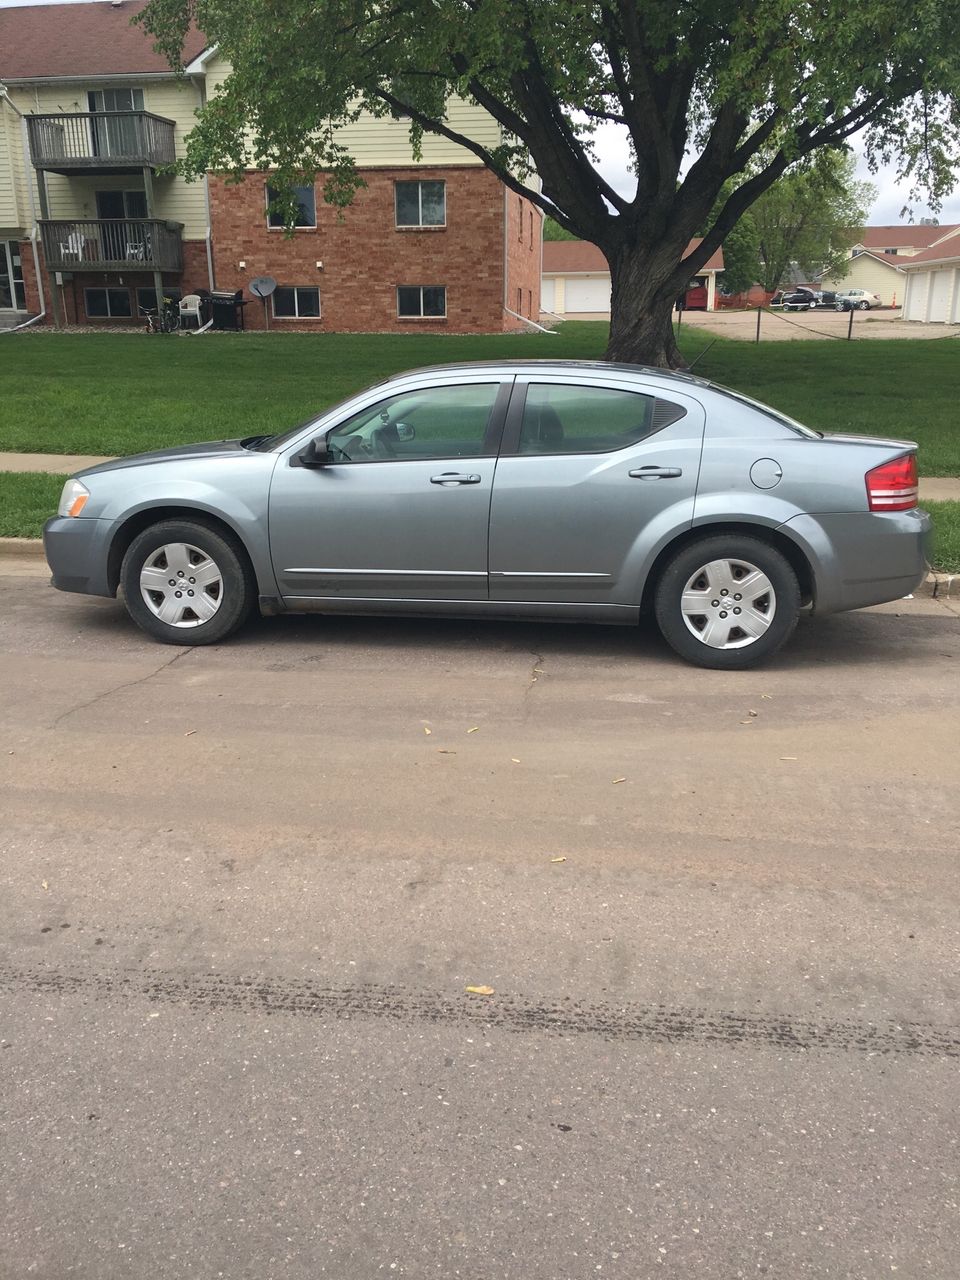 2008 Dodge Avenger | Sioux Falls, SD, Silver Steel Metallic Clearcoat (Silver)